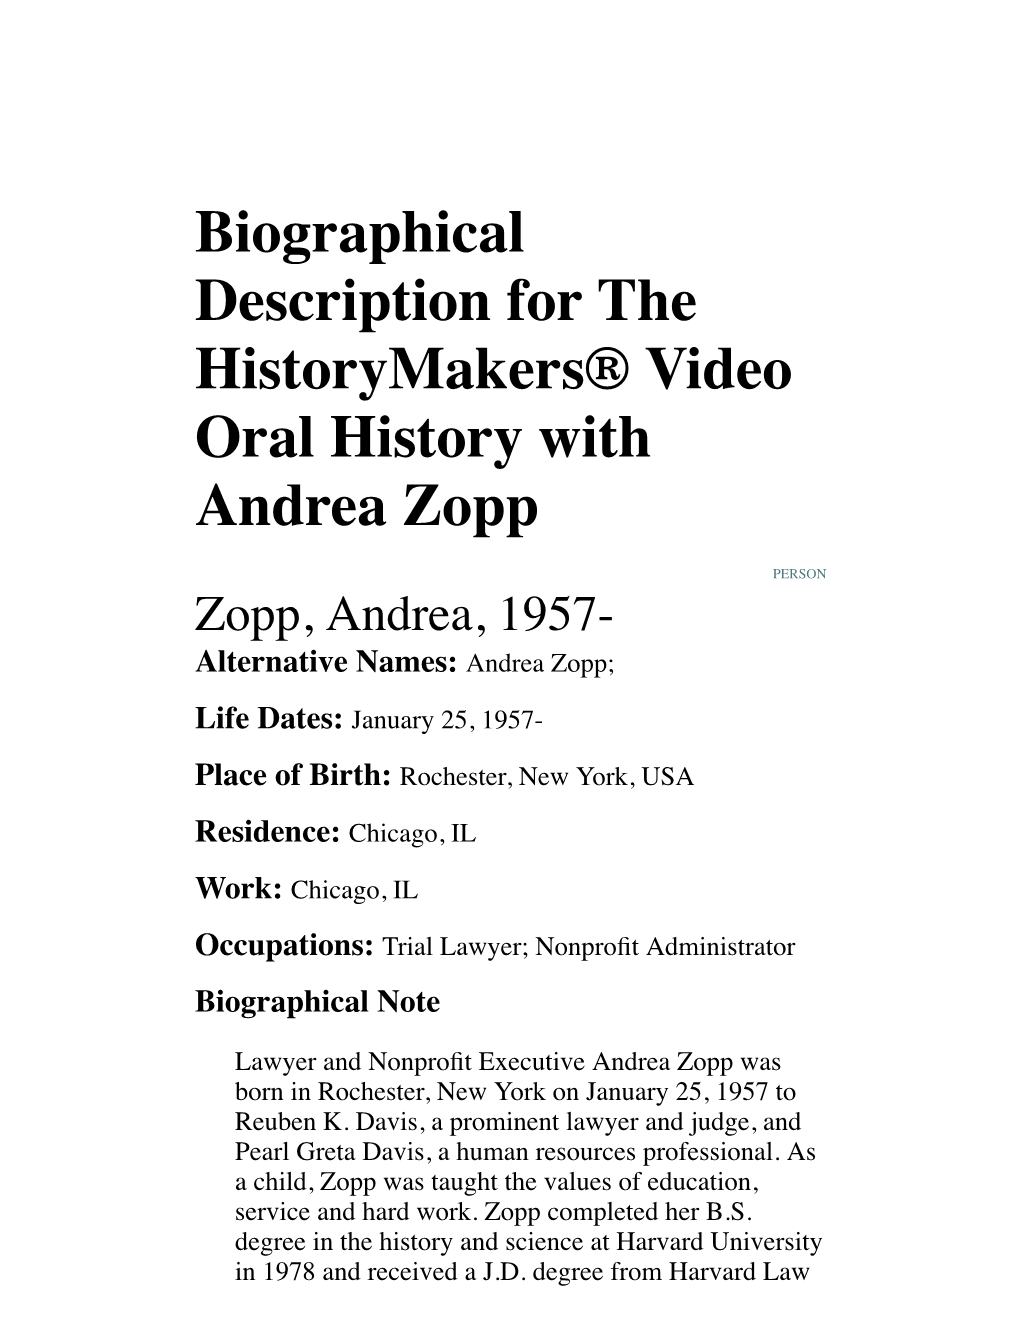 Biographical Description for the Historymakers® Video Oral History with Andrea Zopp